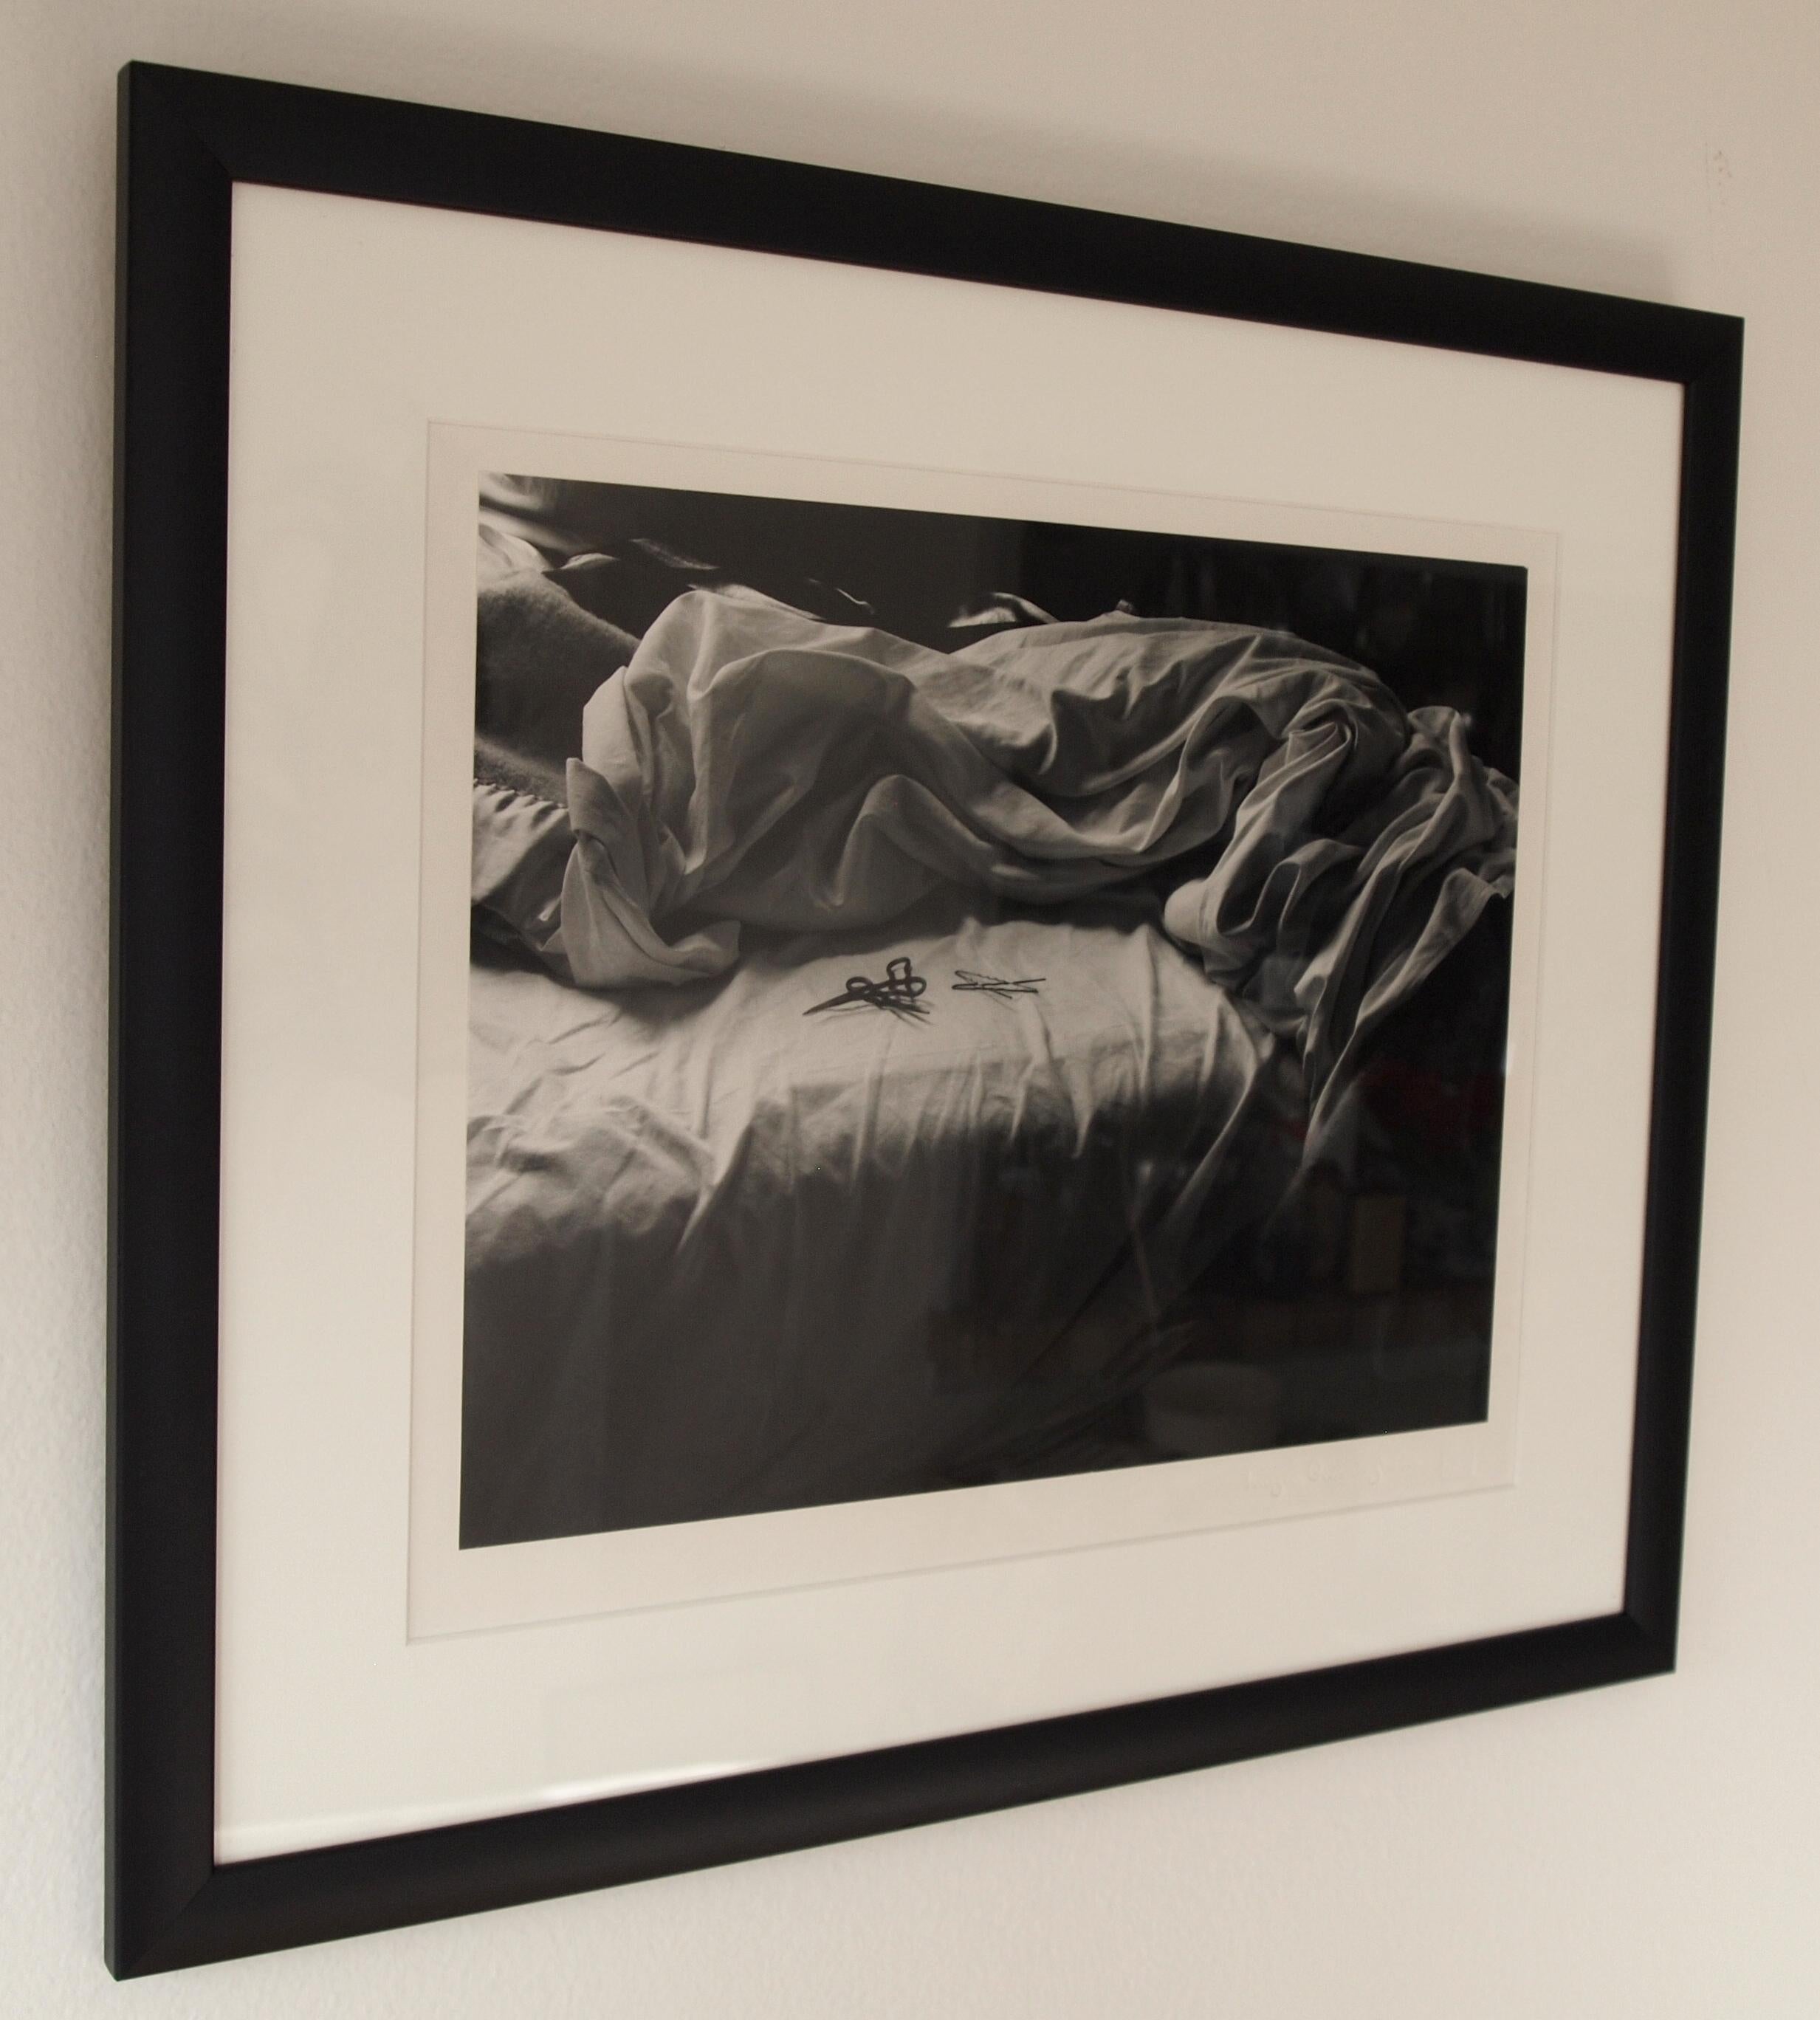 20th Century Imogen Cunningham 'The Unmade Bed', 1957